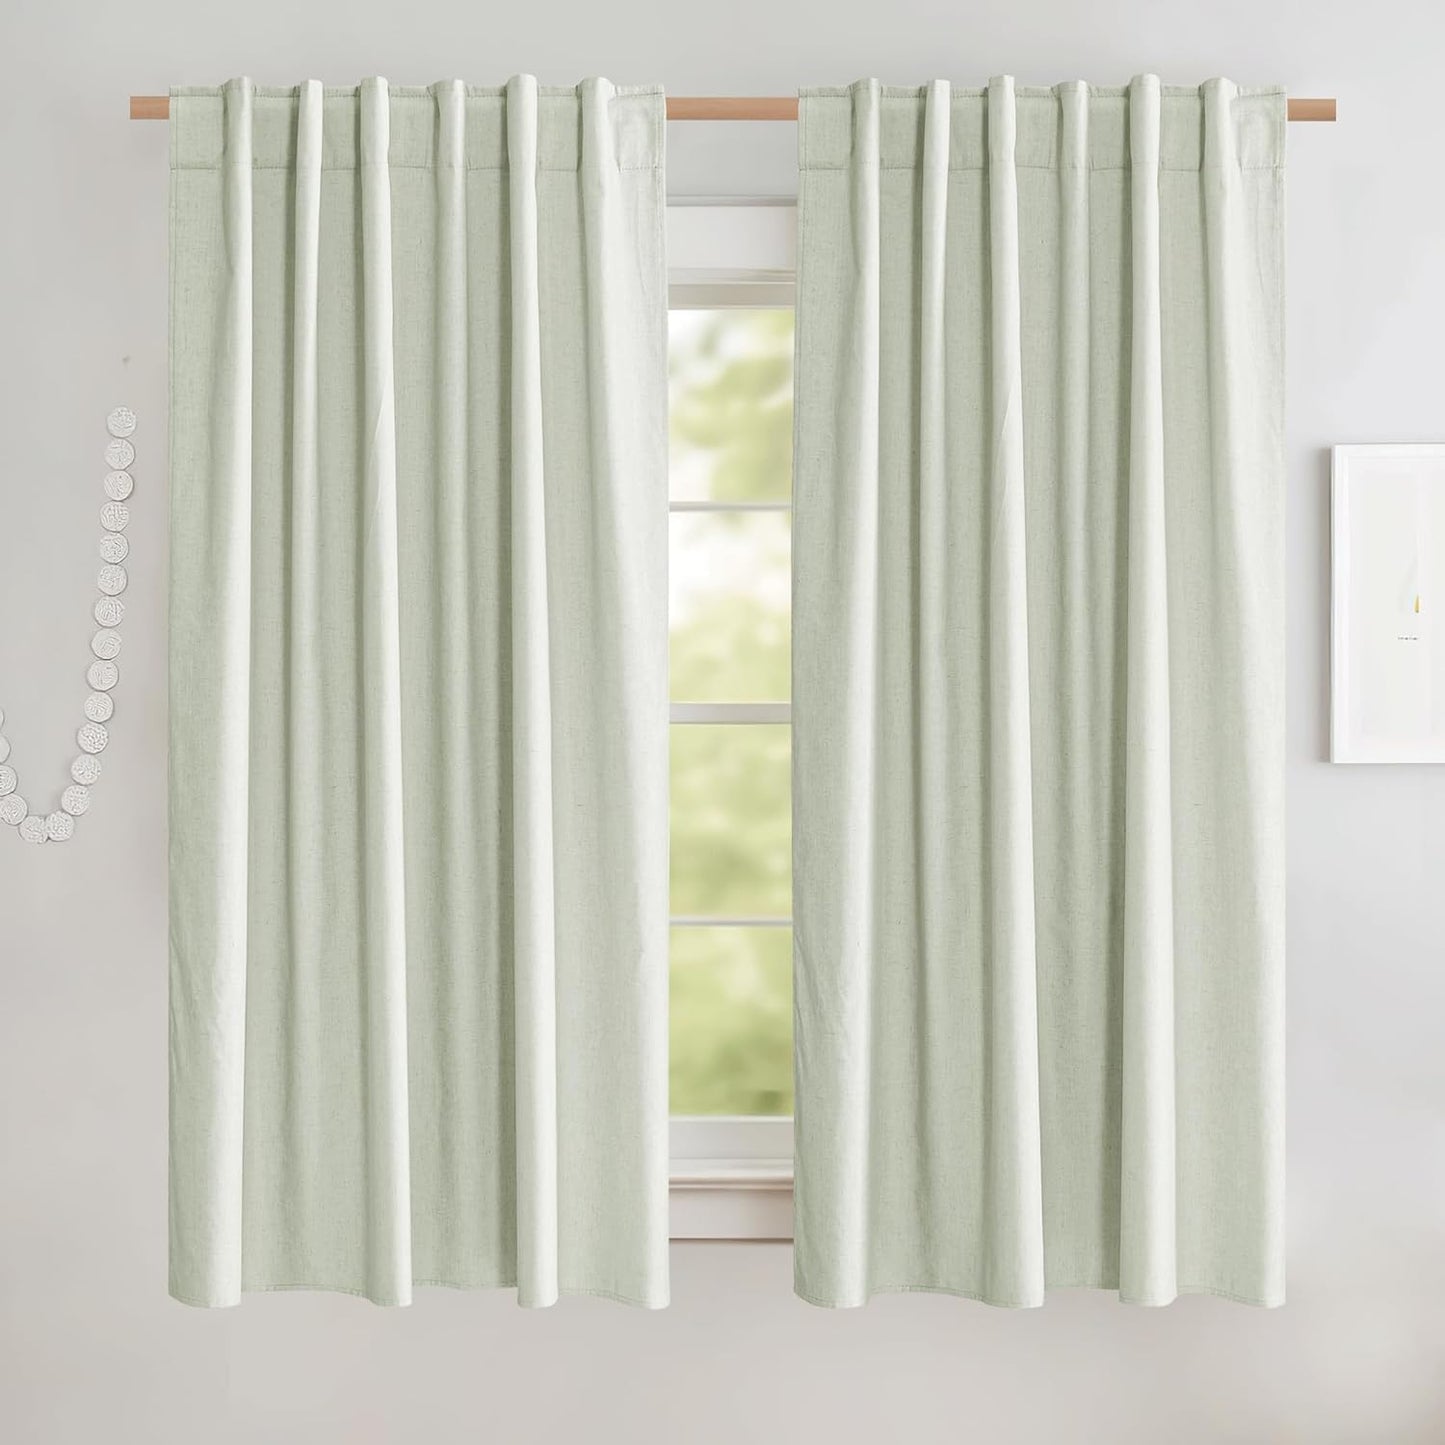 NICETOWN 100% Blackout Linen Curtains for Living Room with Thermal Insulated White Liner, Ivory, 52" Wide, 2 Panels, 84" Long Drapes, Back Tab Retro Linen Curtains Vertical Drapes Privacy for Bedroom  NICETOWN Sage Green W52 X L45 